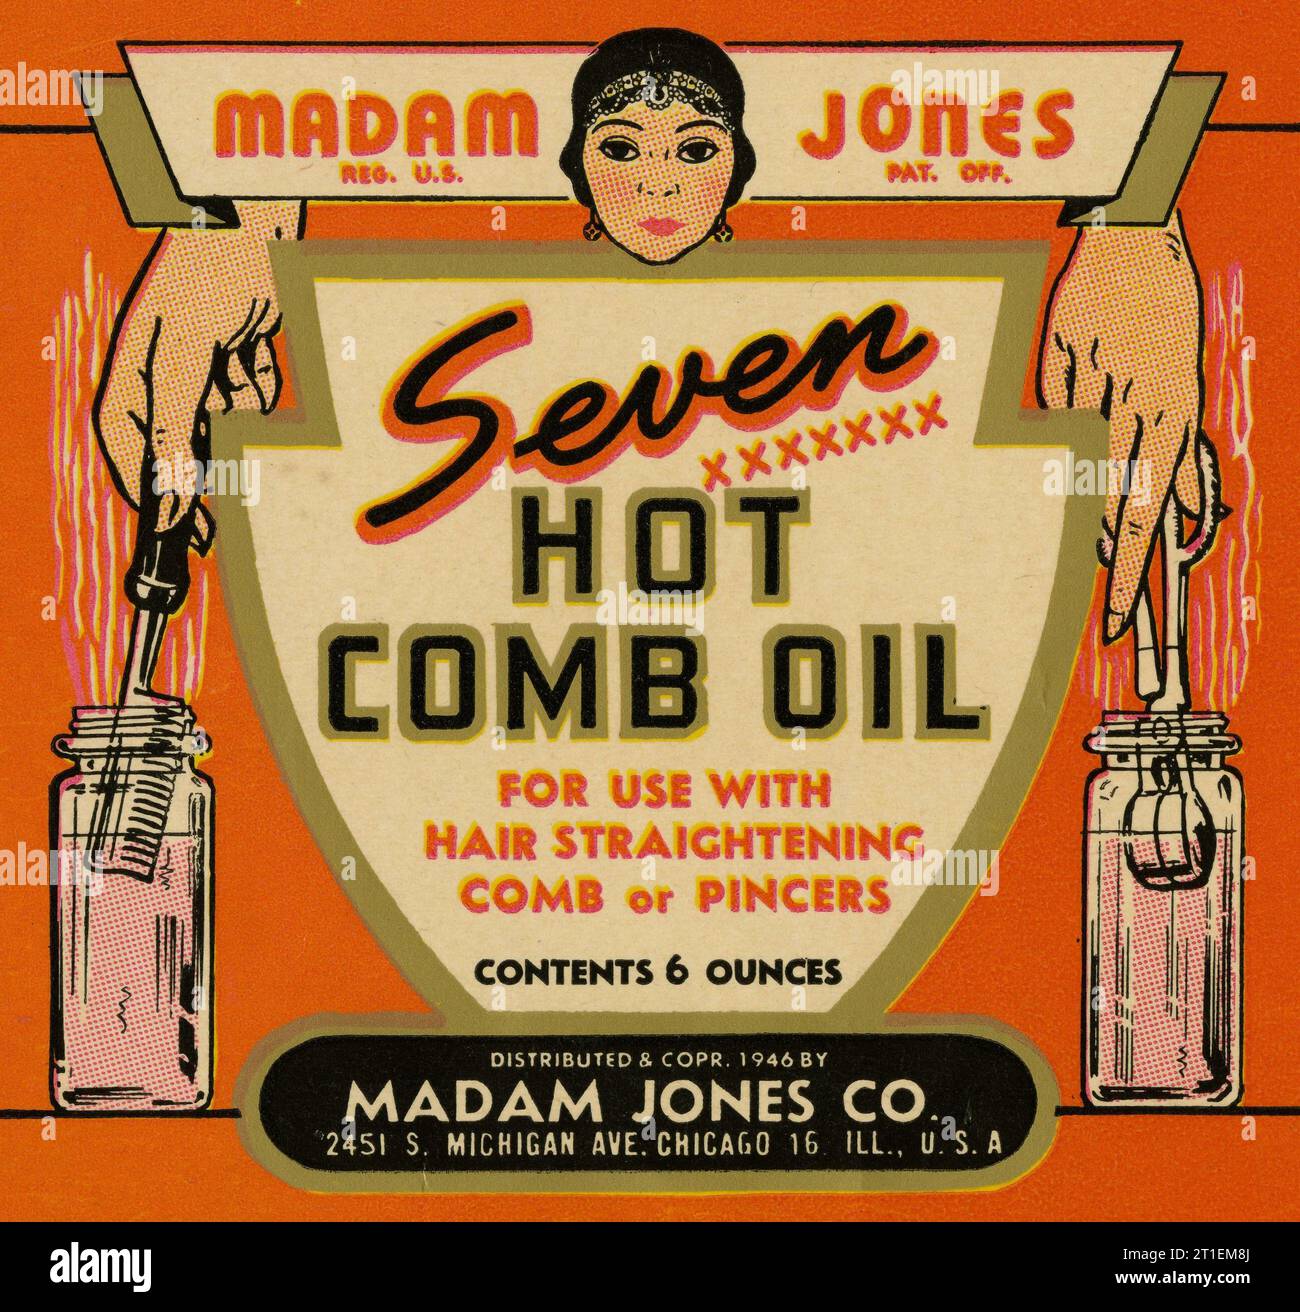 Madam Jones, Seven Hot Comb Oil label from box, for use with hair straightening comb. USA.  1930s advertising.  Vintage packaging, design Stock Photo